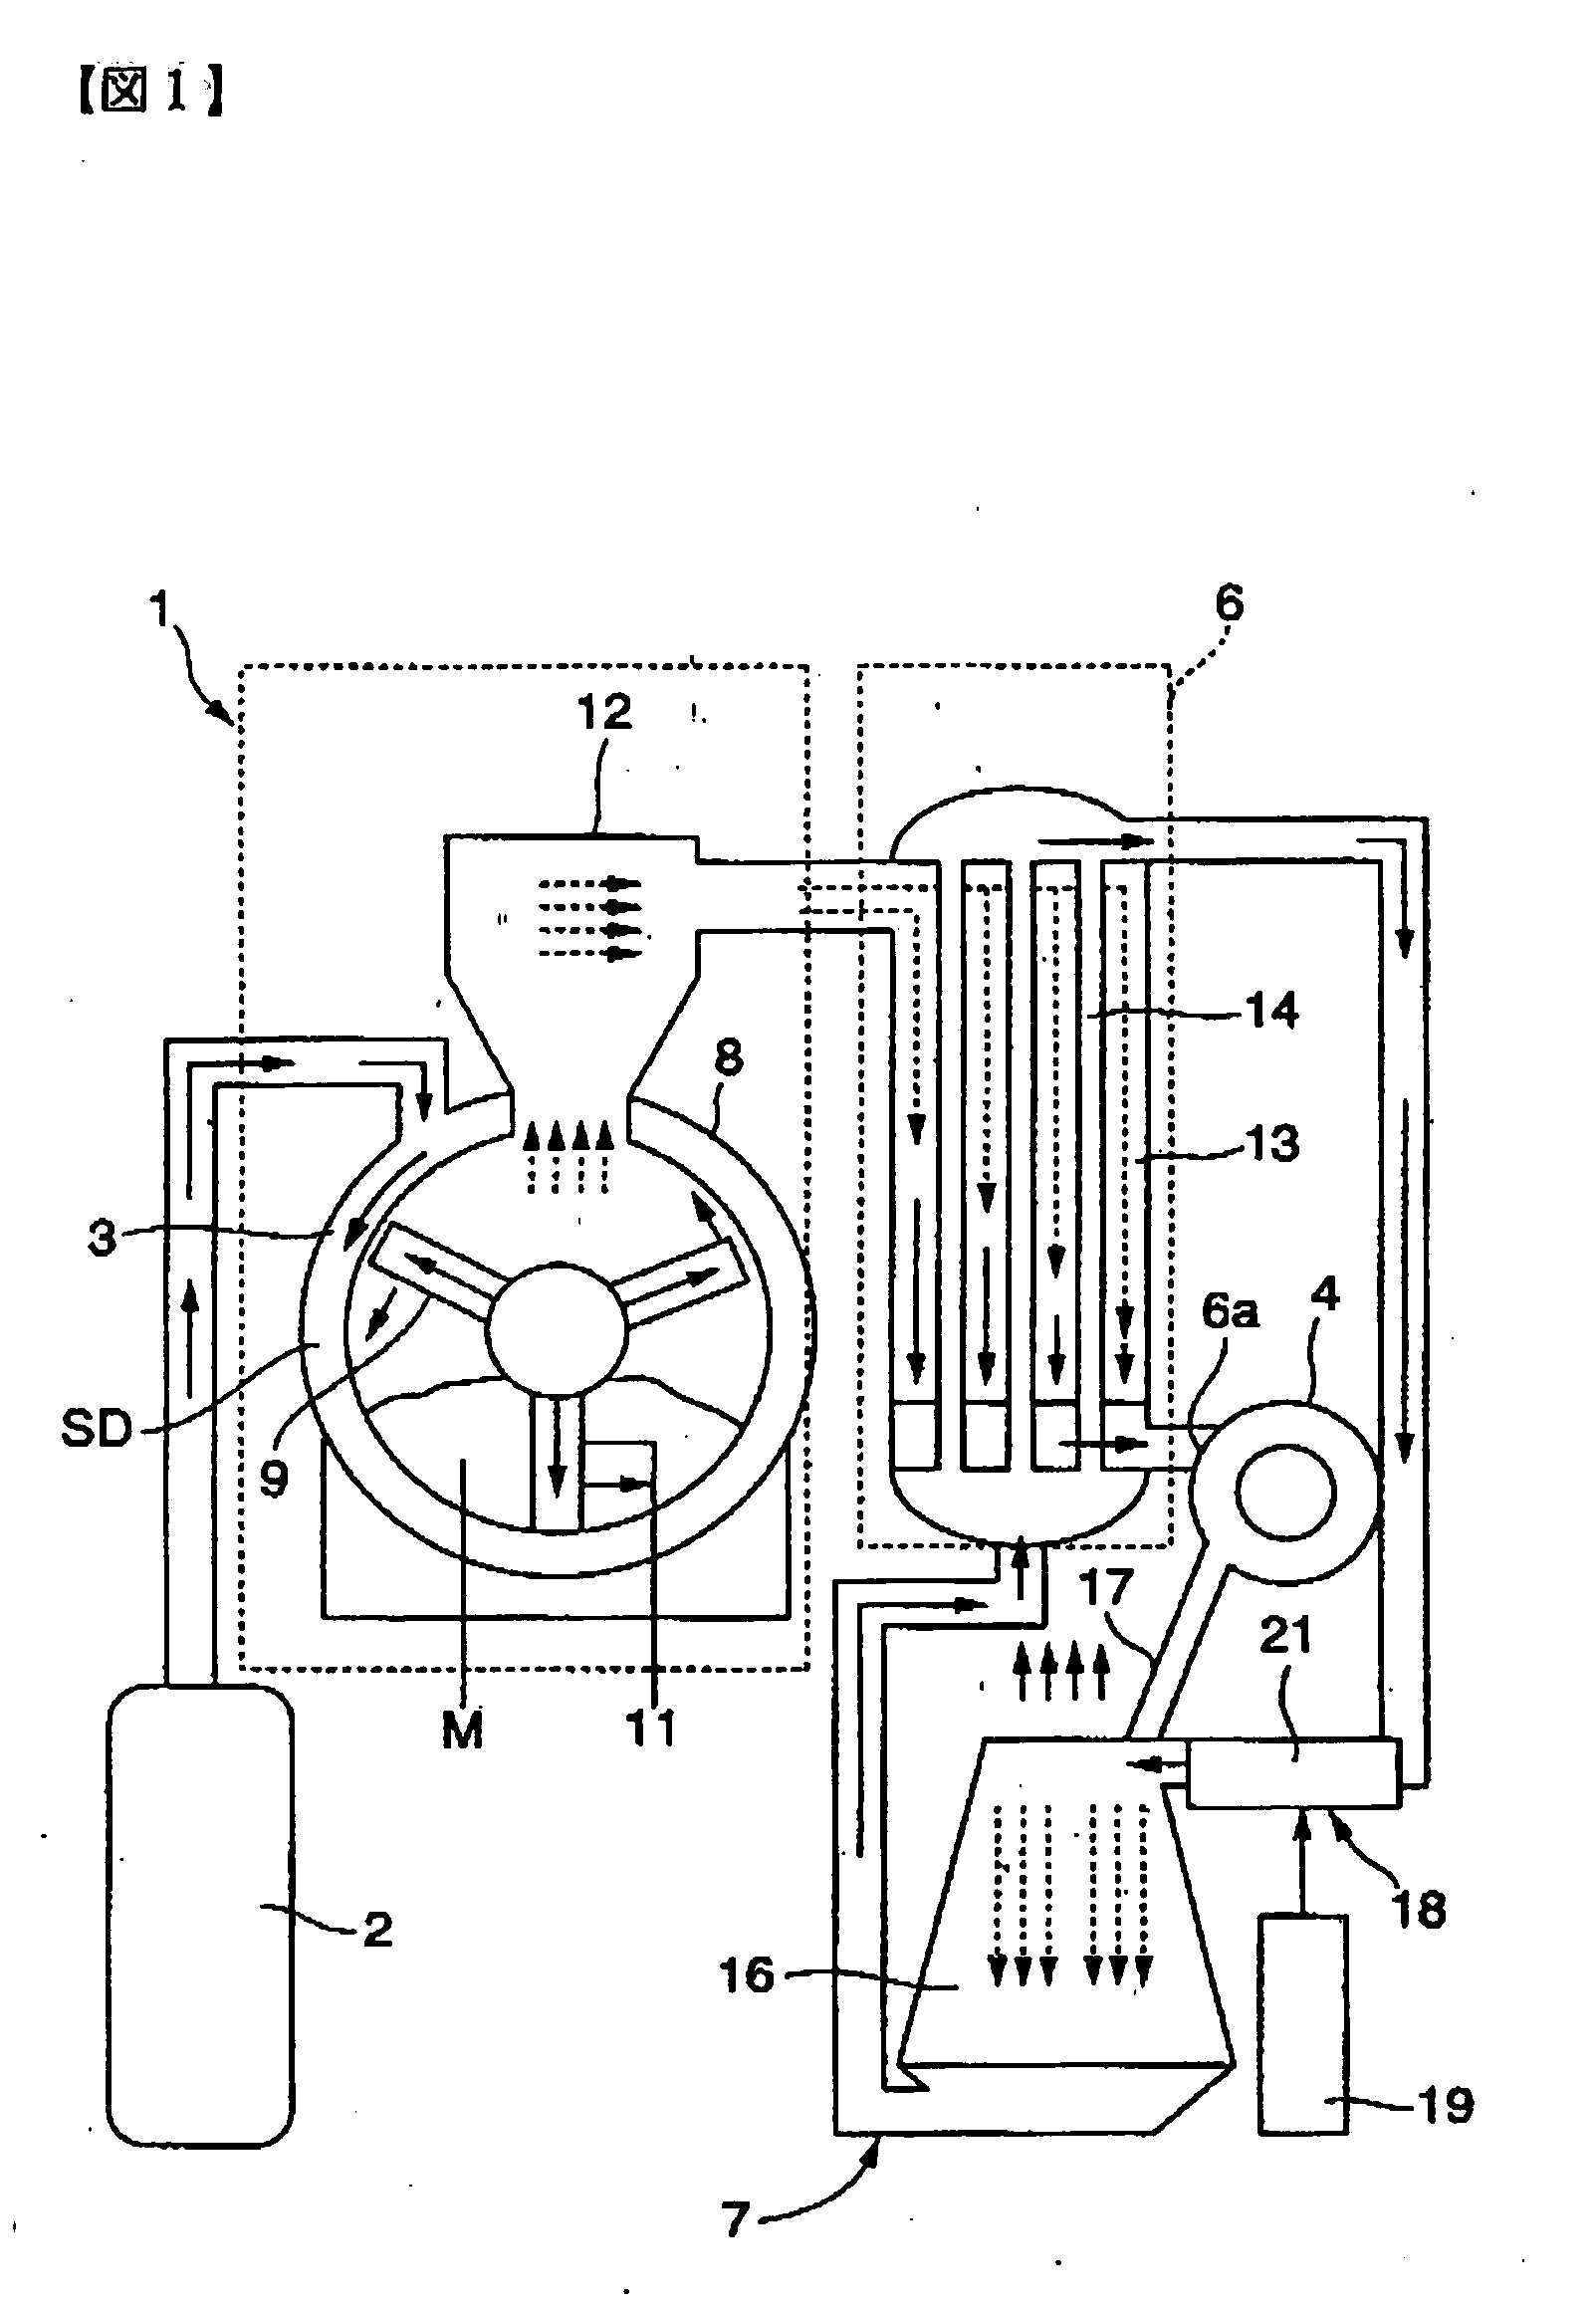 Method and apparatus for producing organic fertilizer